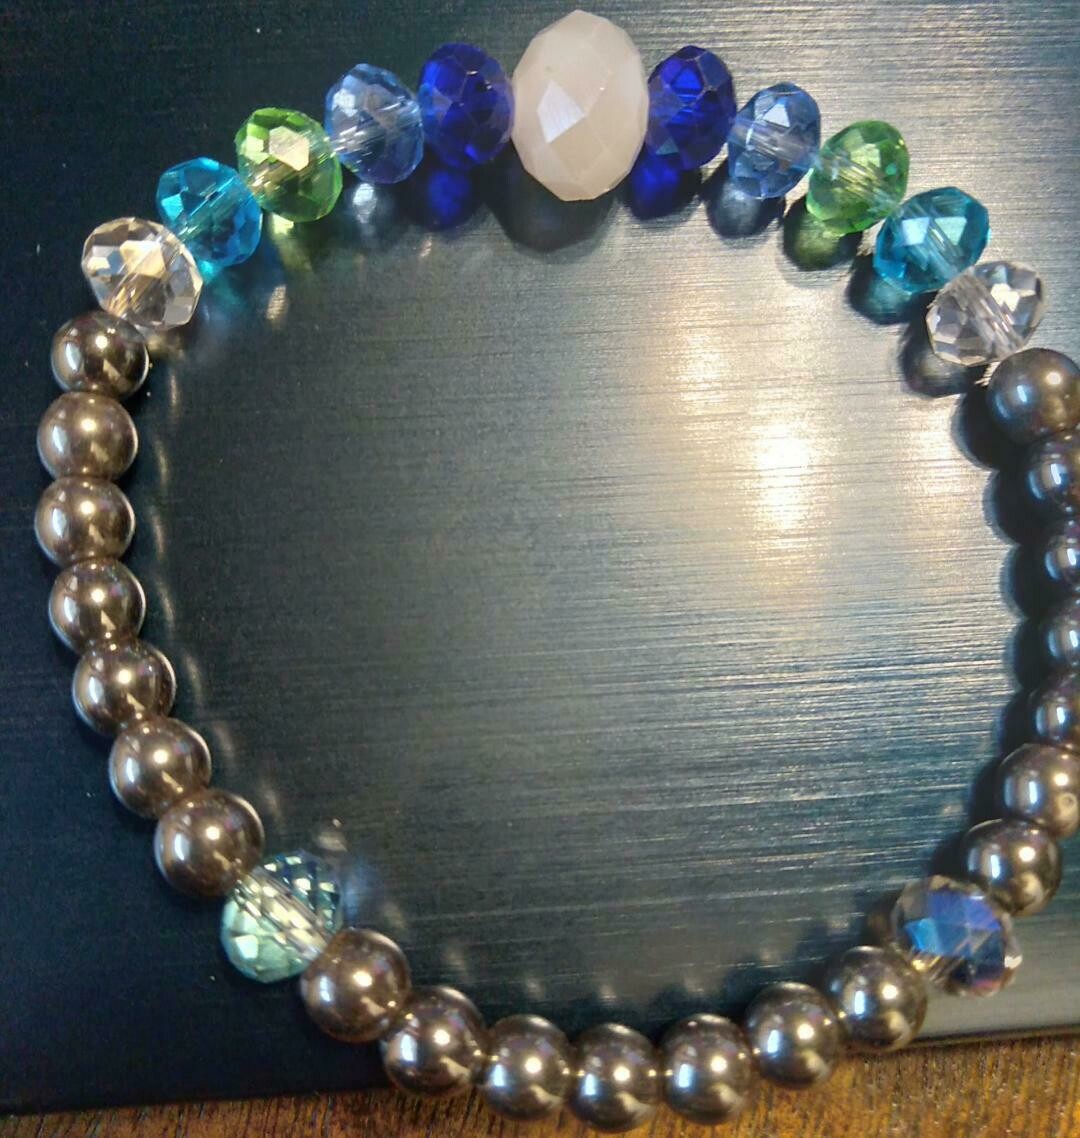 "REDo" Hemitite Beads with blue and green crystals with 1 white vintage bead